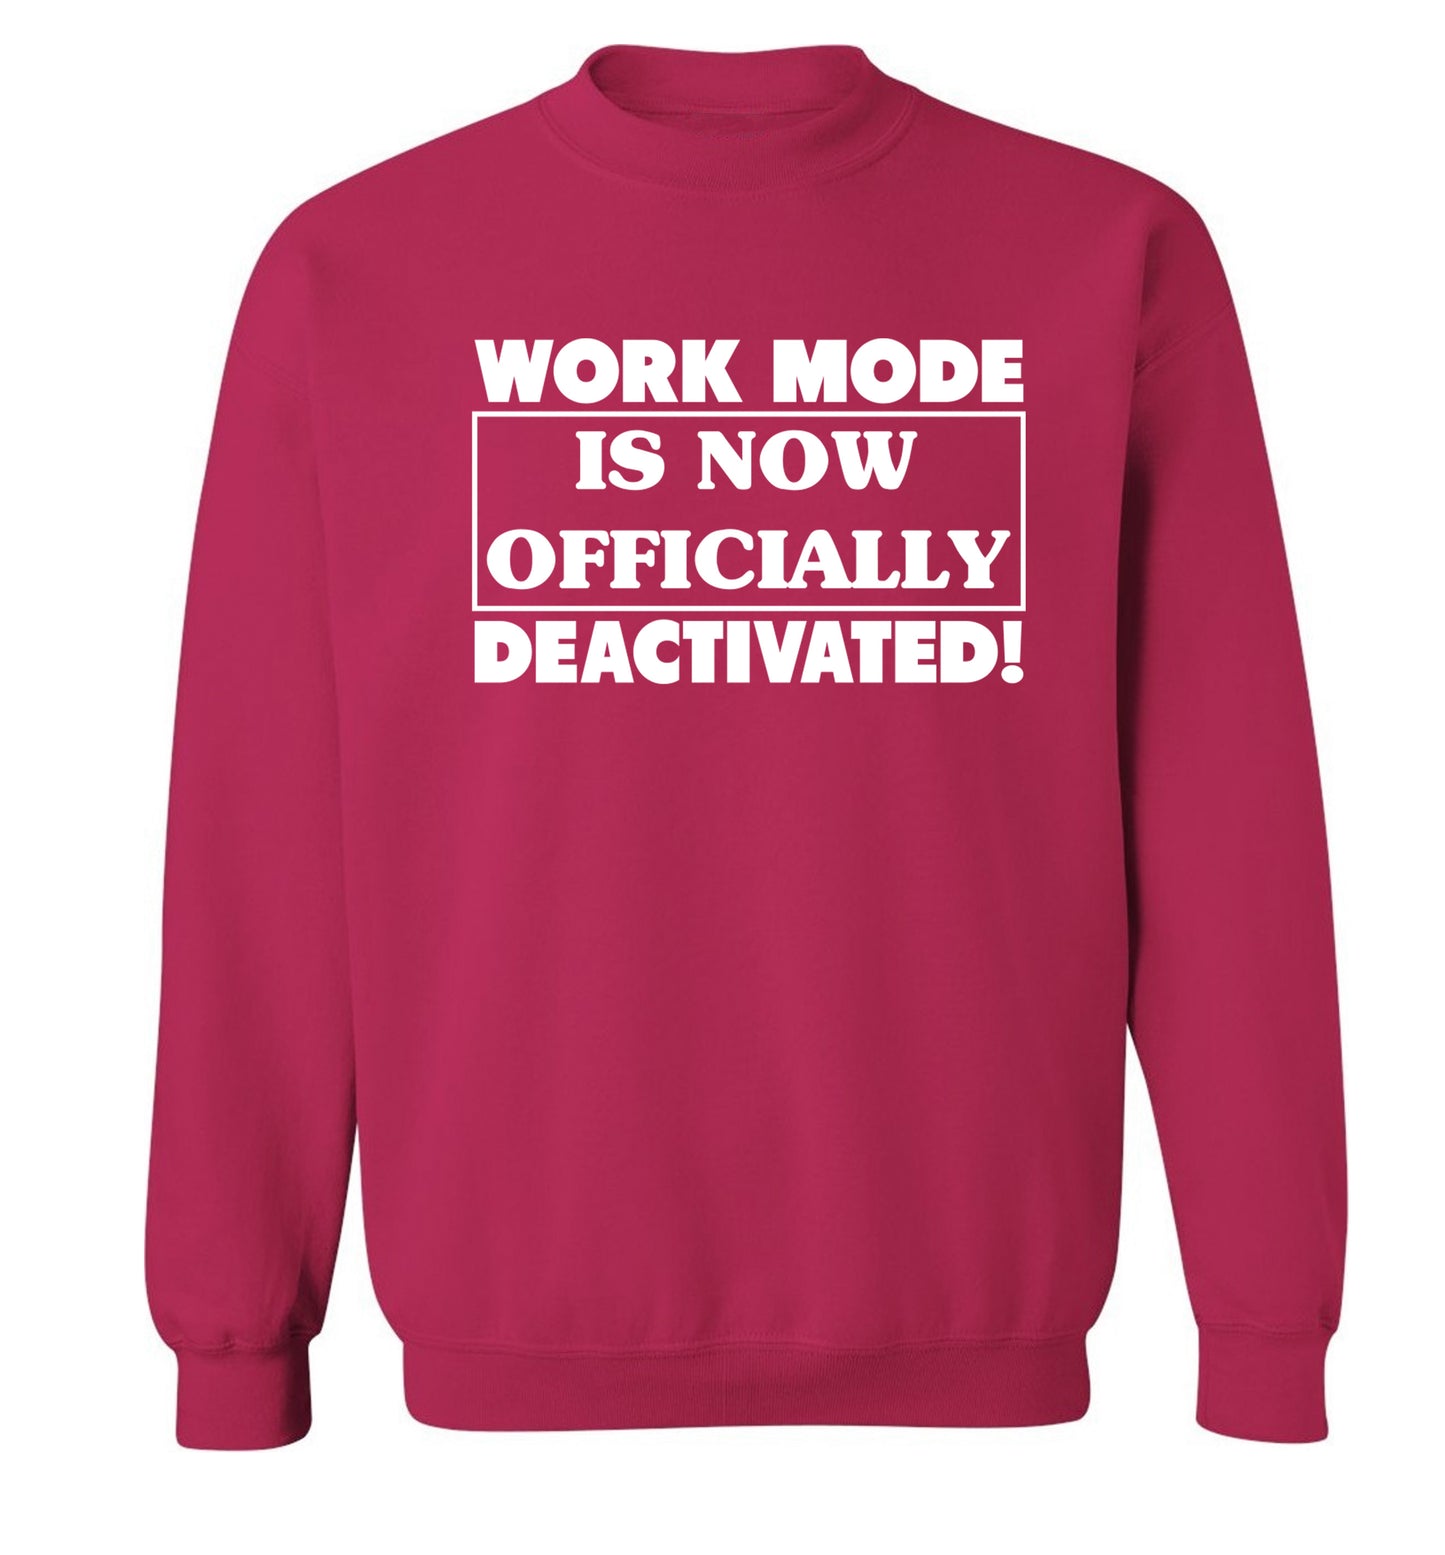 Work mode is now officially deactivated Adult's unisex pink Sweater 2XL